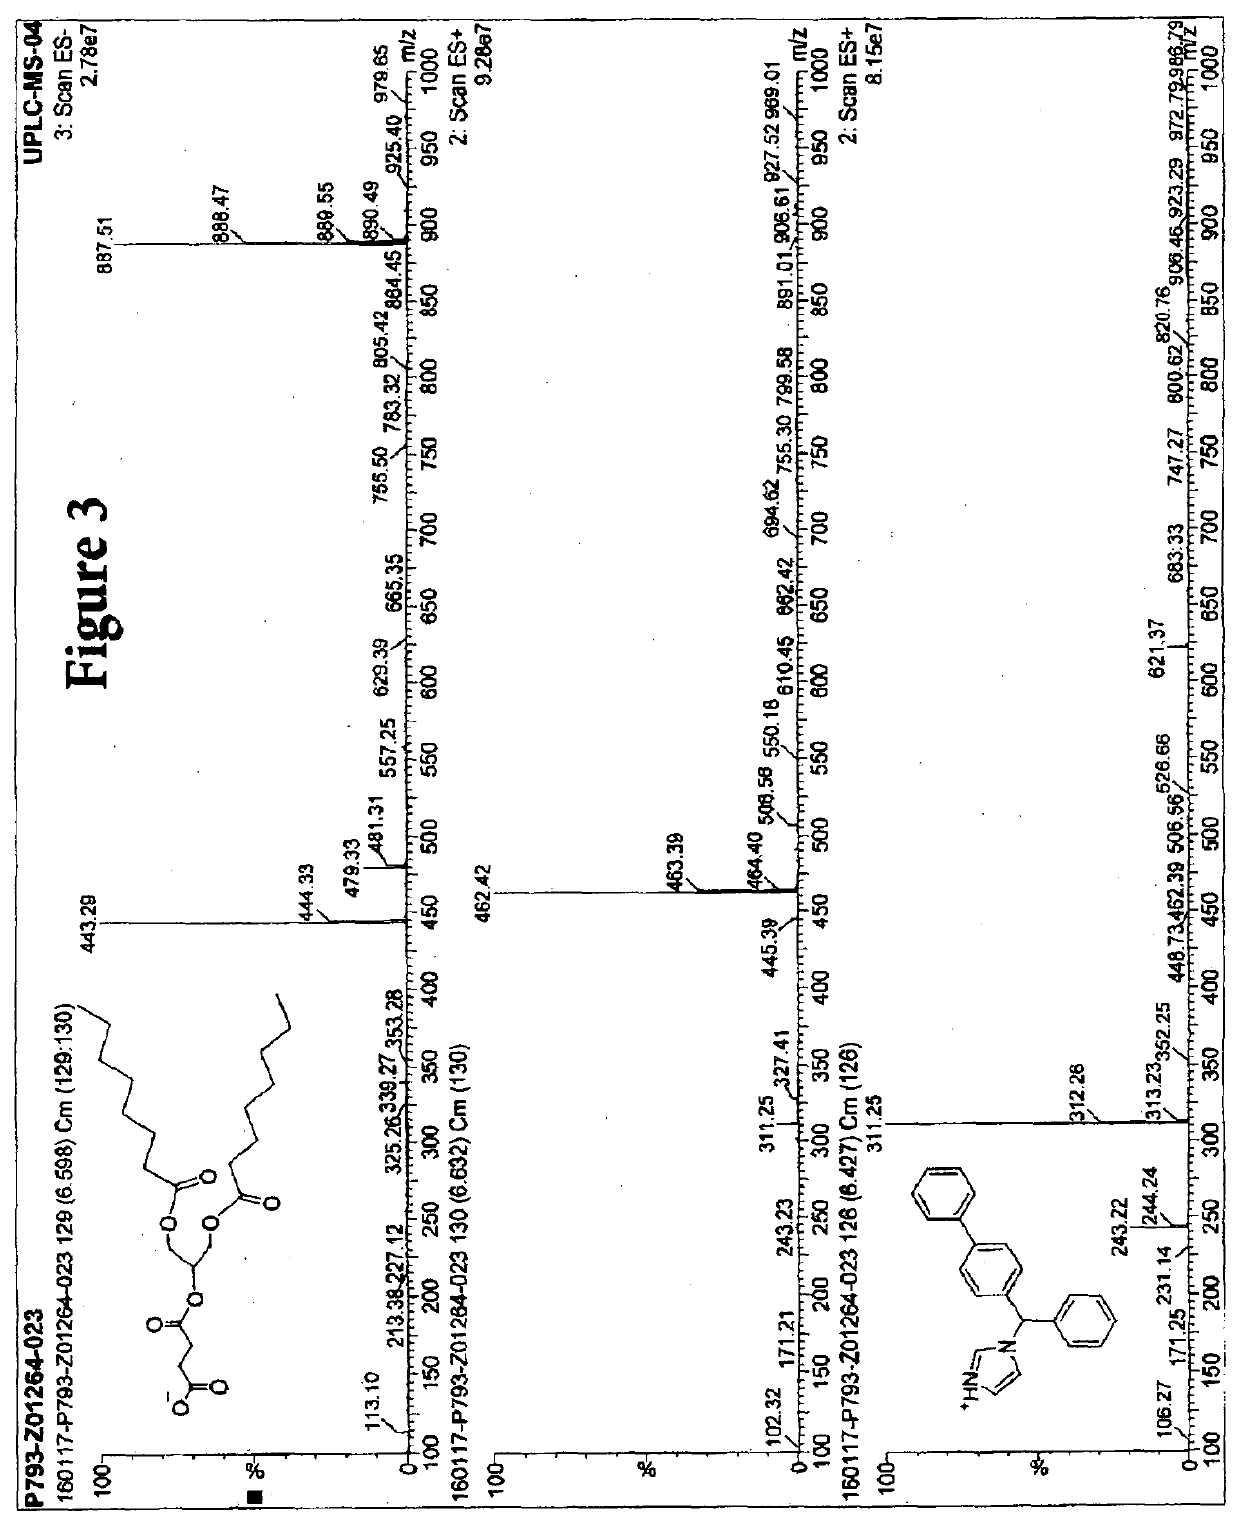 Compositions and methods for the treatment of oral infectious diseases